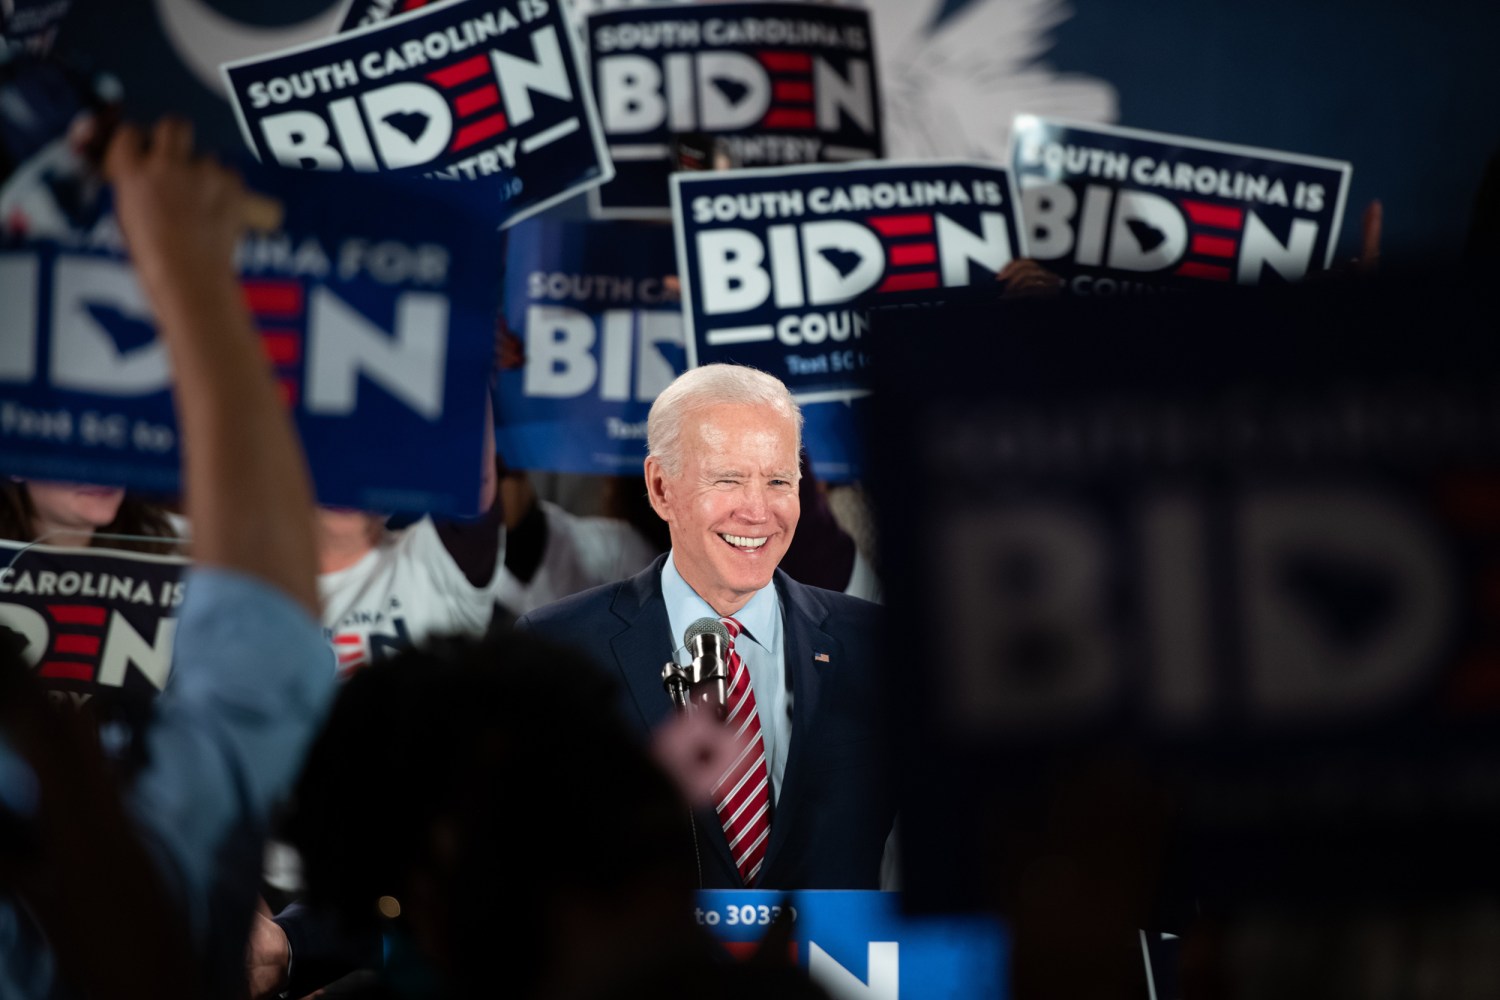 Biden announces new policy efforts aimed at black voters